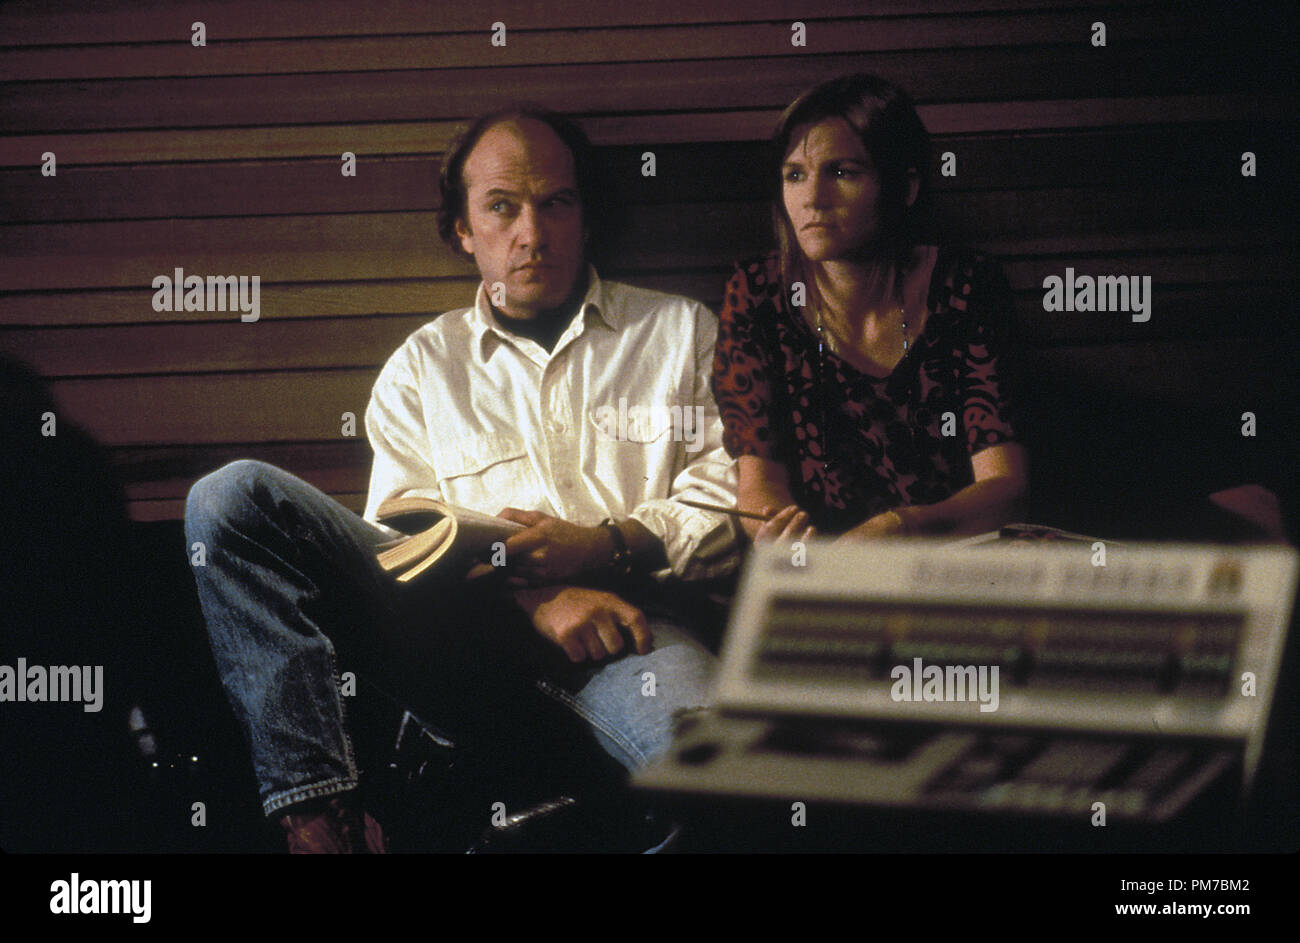 Film Still from 'Georgia' Ted Levine, Mare Winningham © 1995 Miramax Photo Credit: Joyce Rudolph   File Reference # 31043353THA  For Editorial Use Only - All Rights Reserved Stock Photo